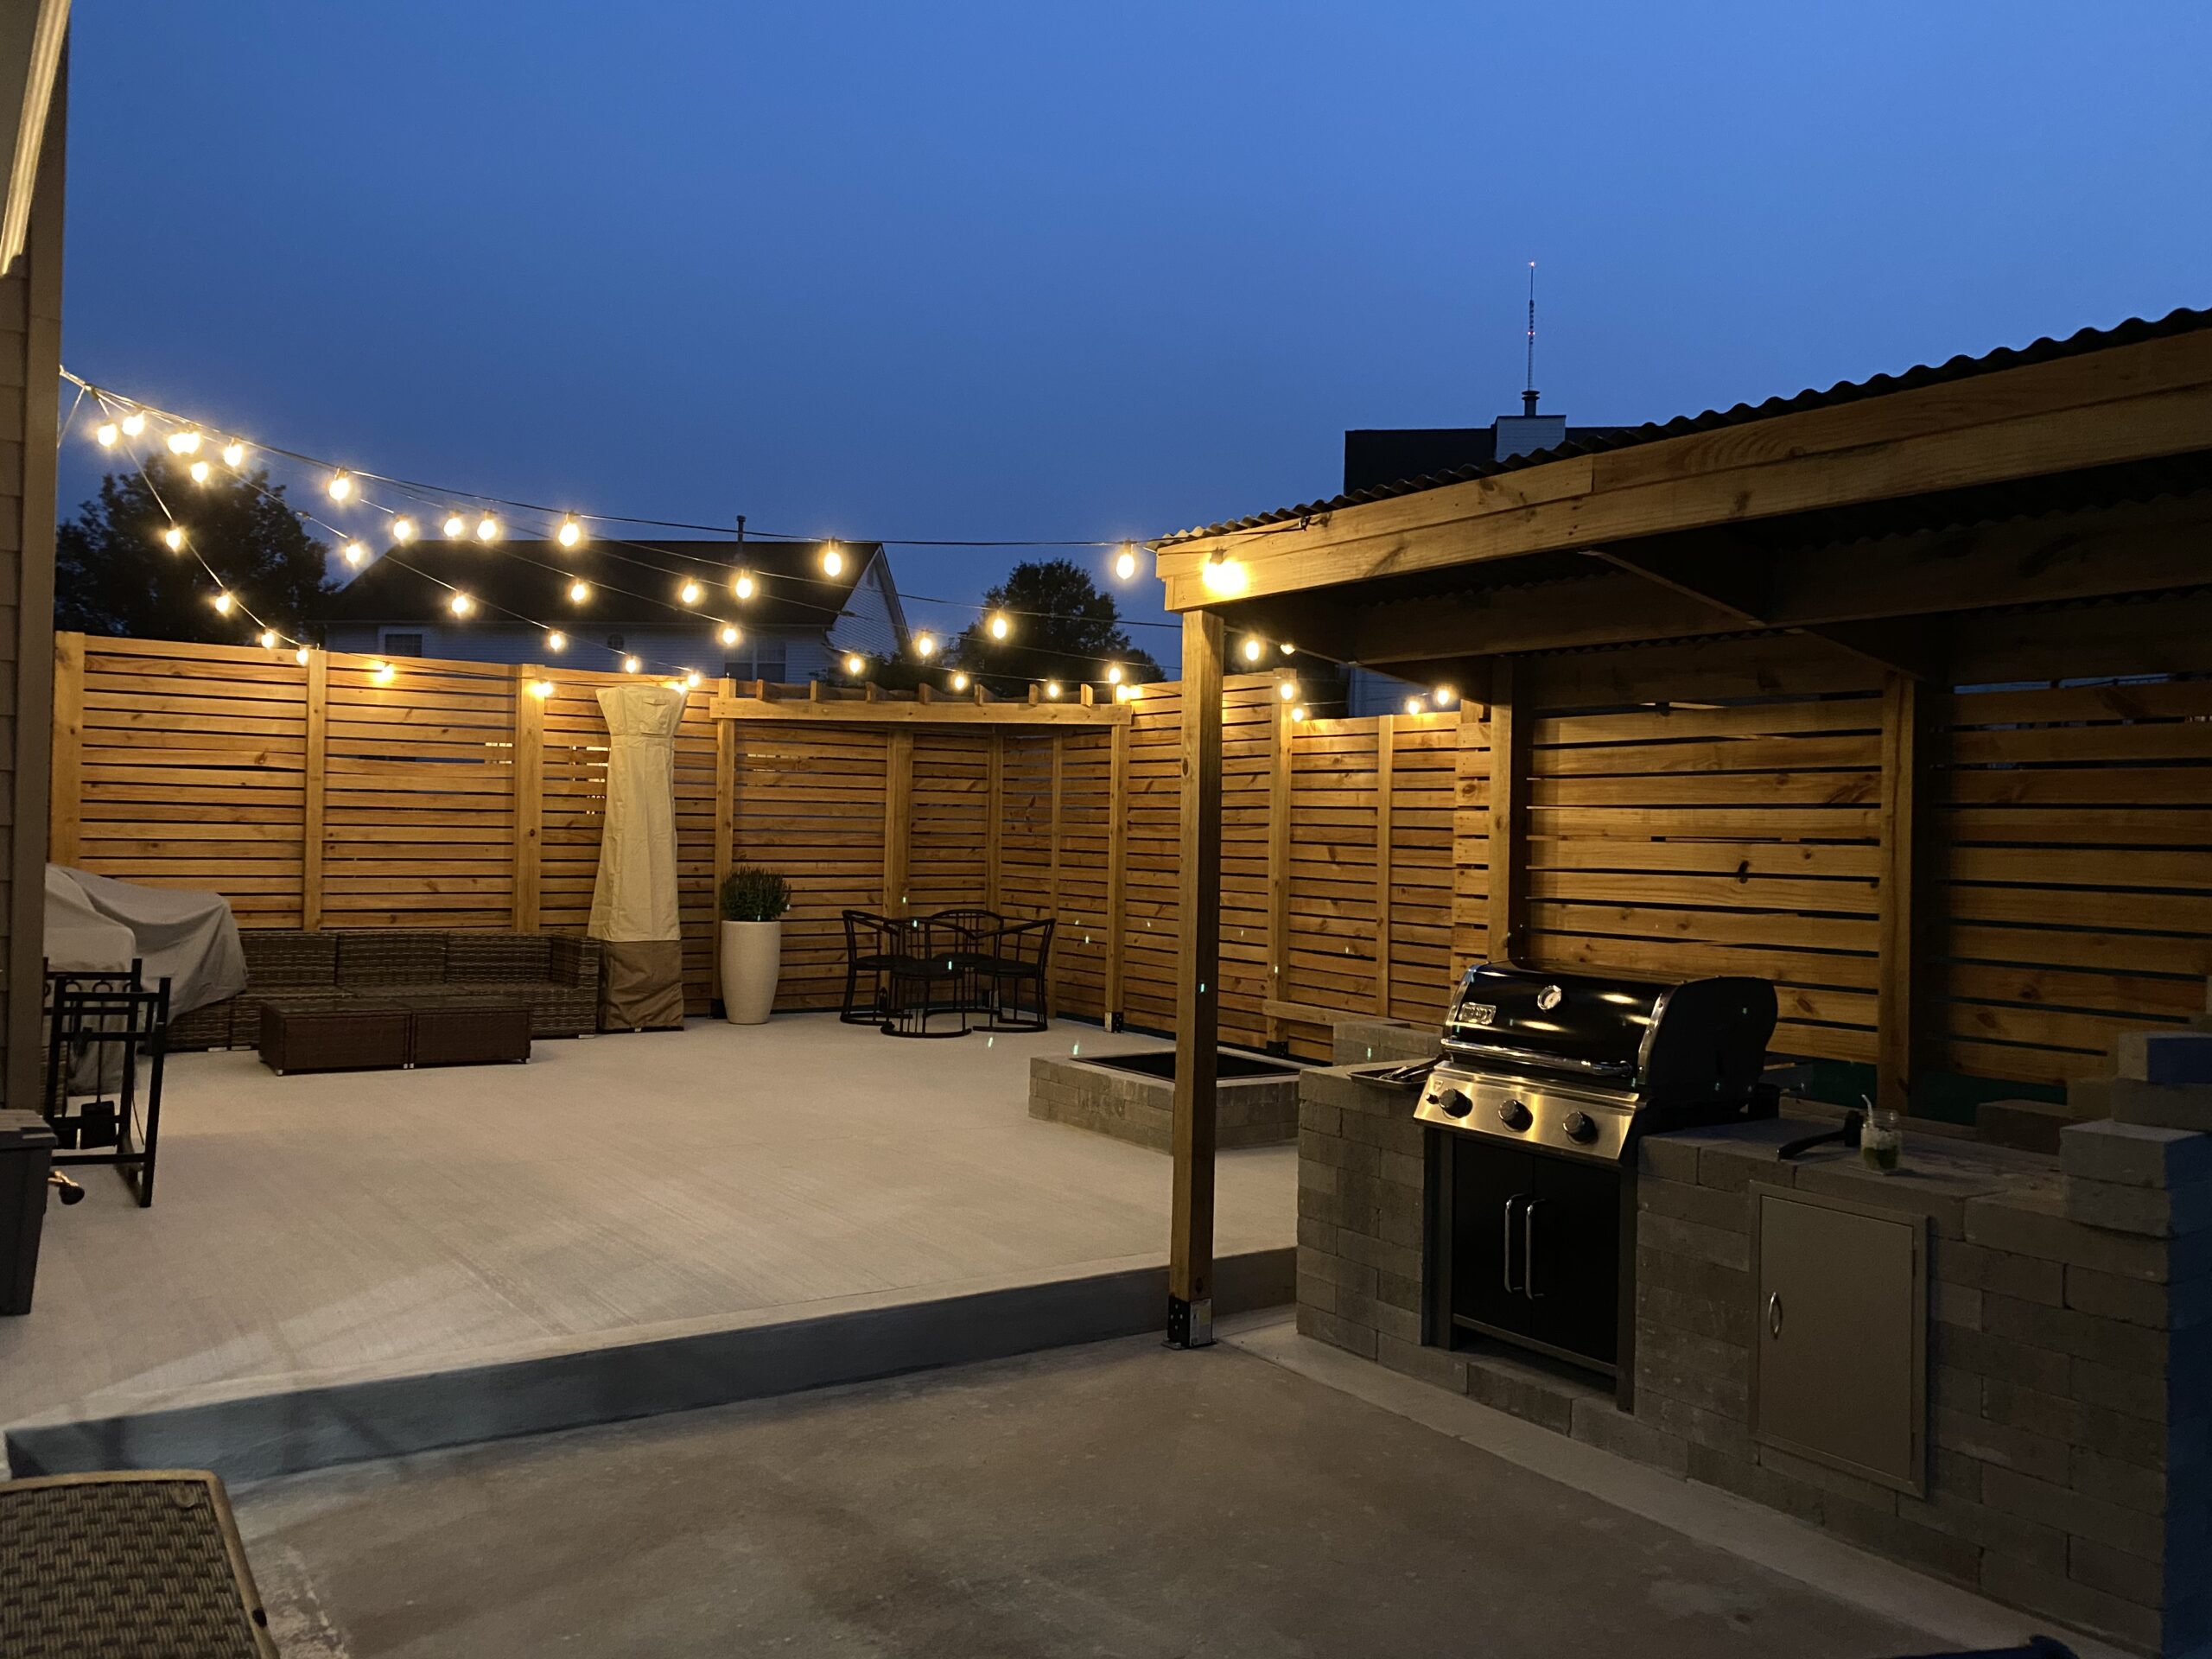 Furnished back patio with privacy fence, grill, and fire pit